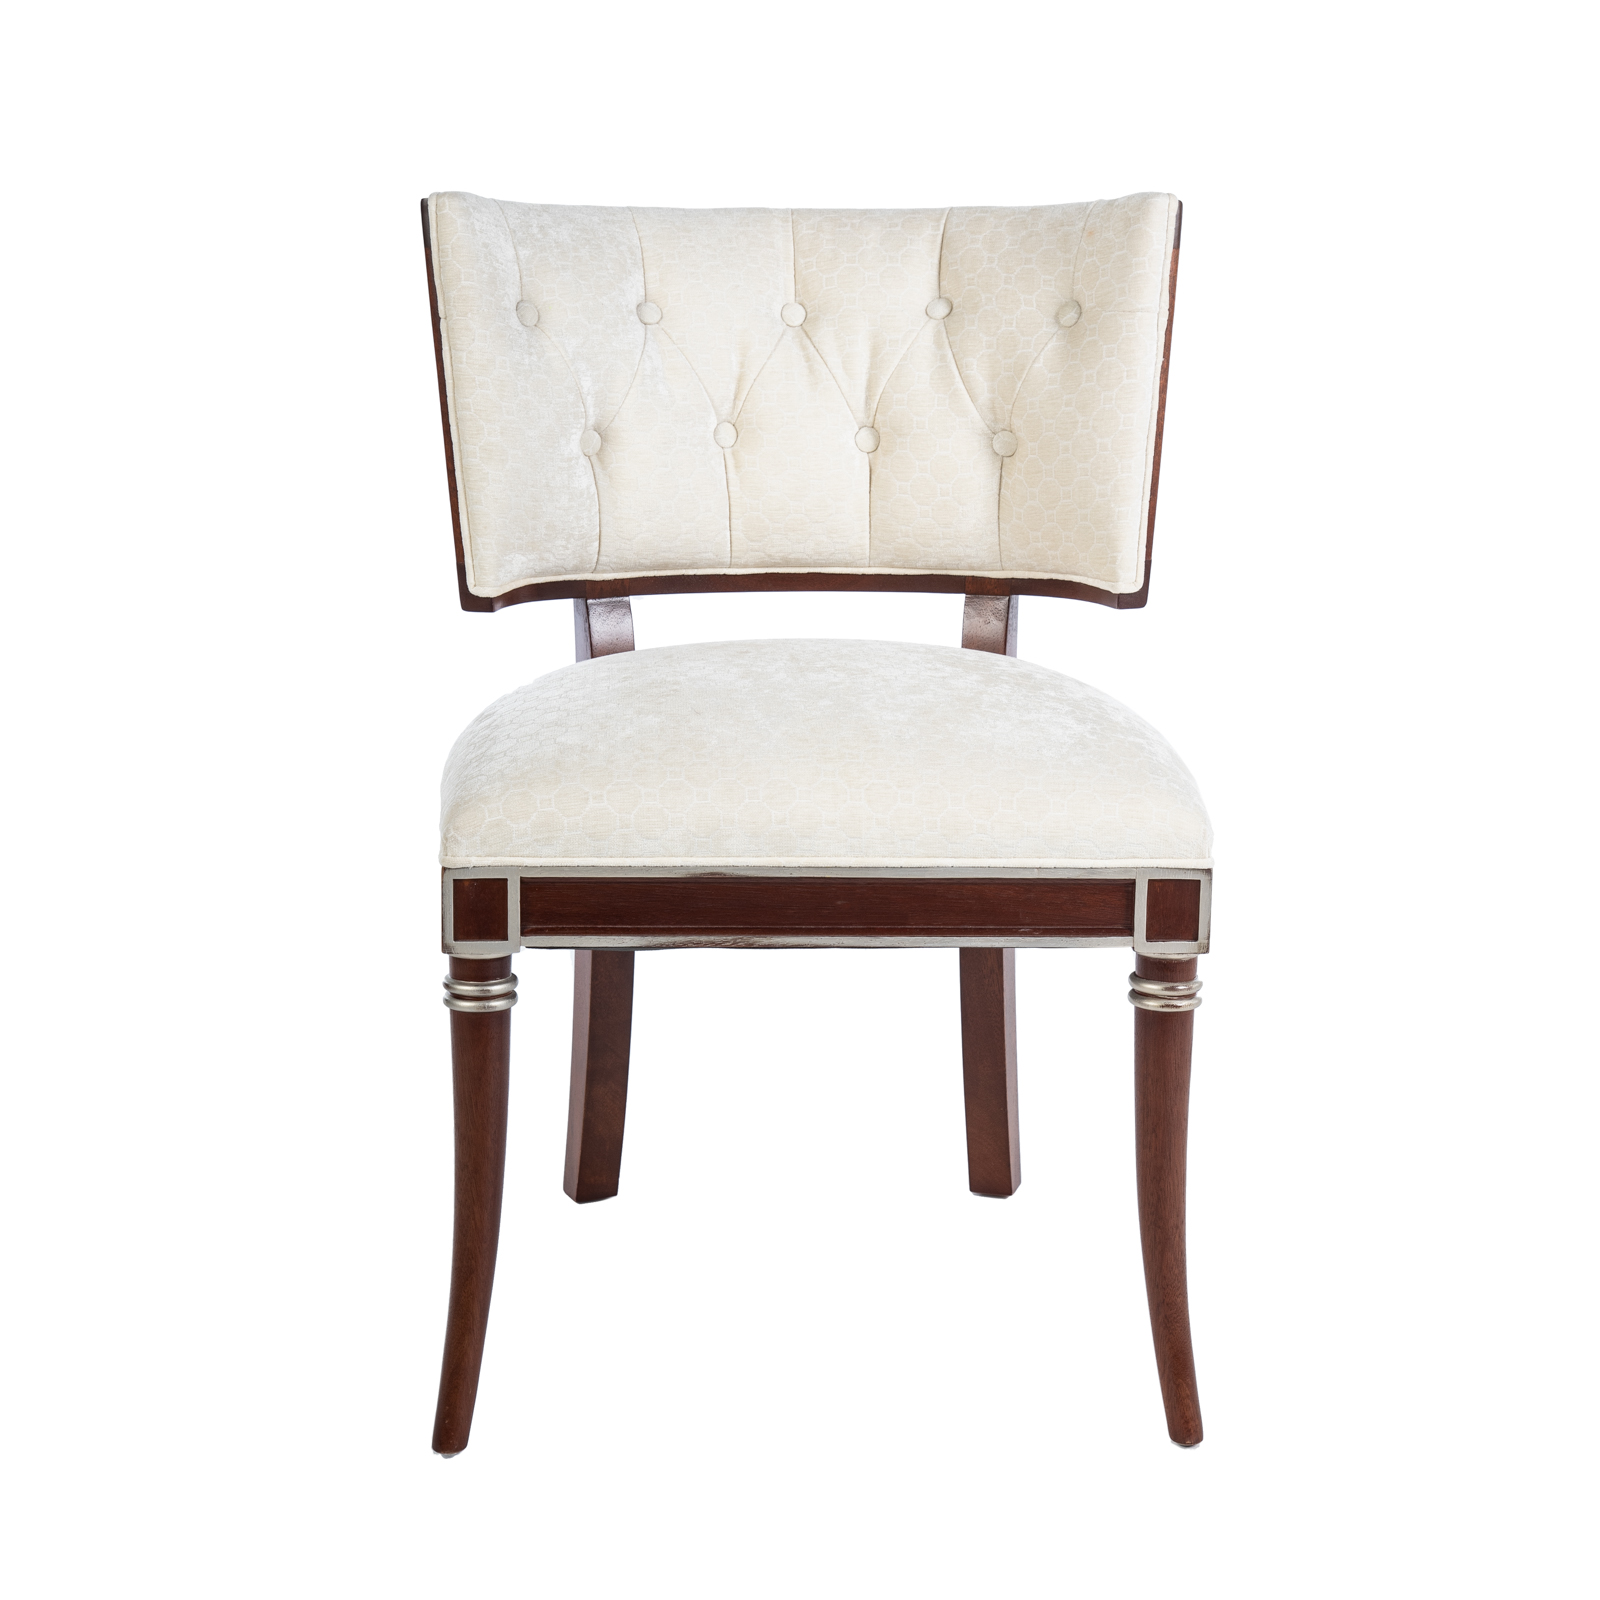 CONTEMPORARY UPHOLSTERED SIDE CHAIR 288704